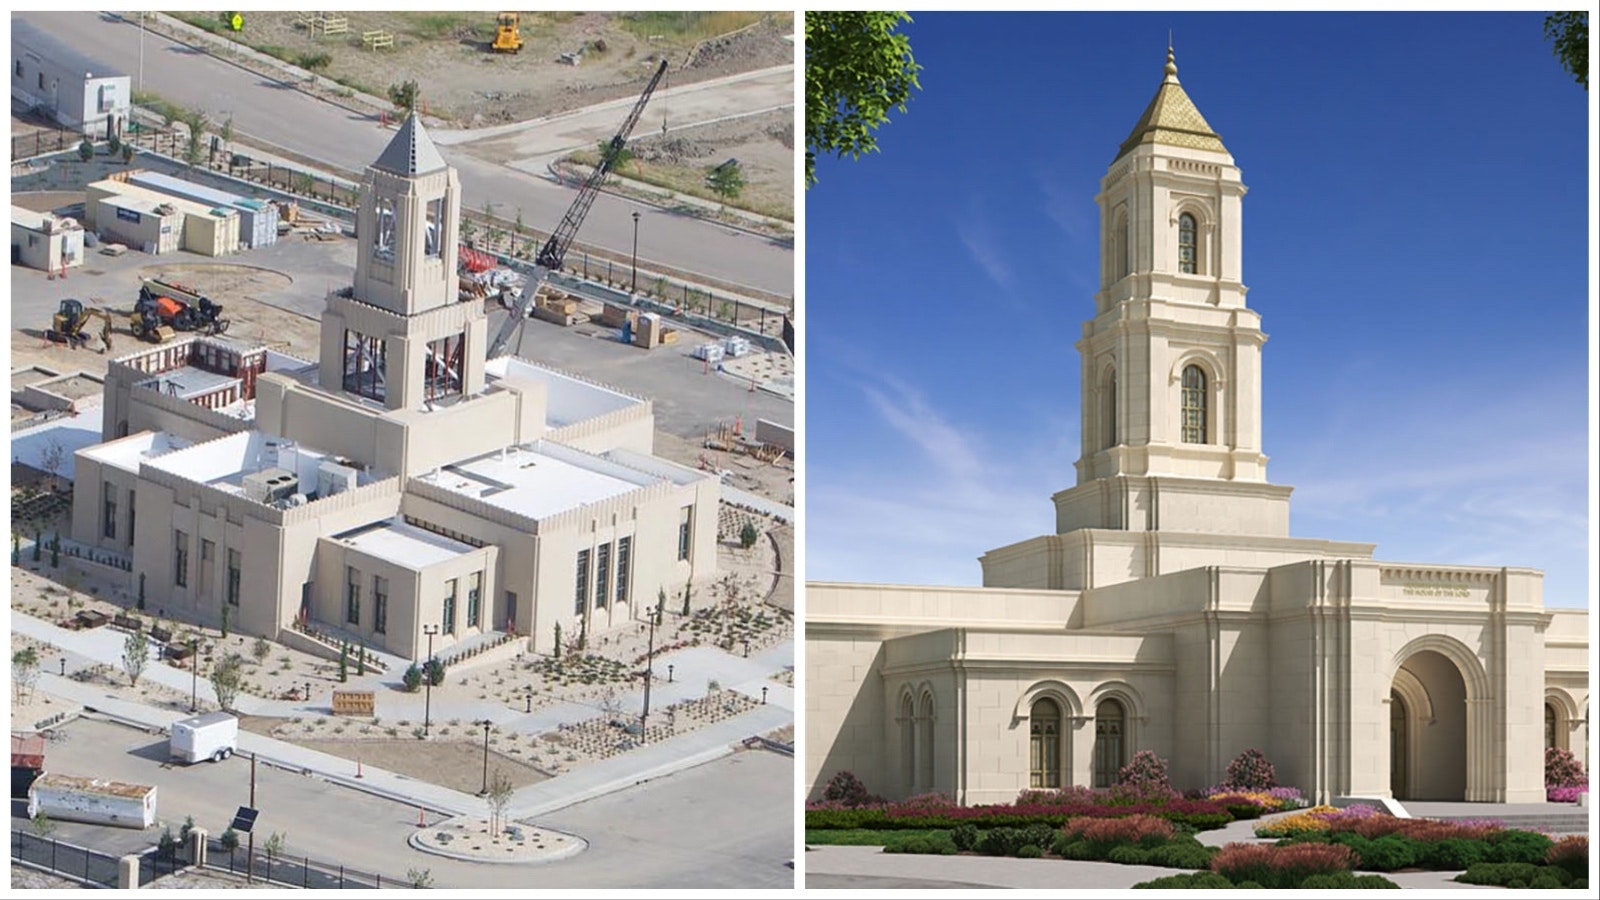 The Casper Church of Jesus Christ of Latter-day Saints temple left, is nearing completion wile the proposed Cody Wyoming Temple, right, has had months of controversy and opposition.